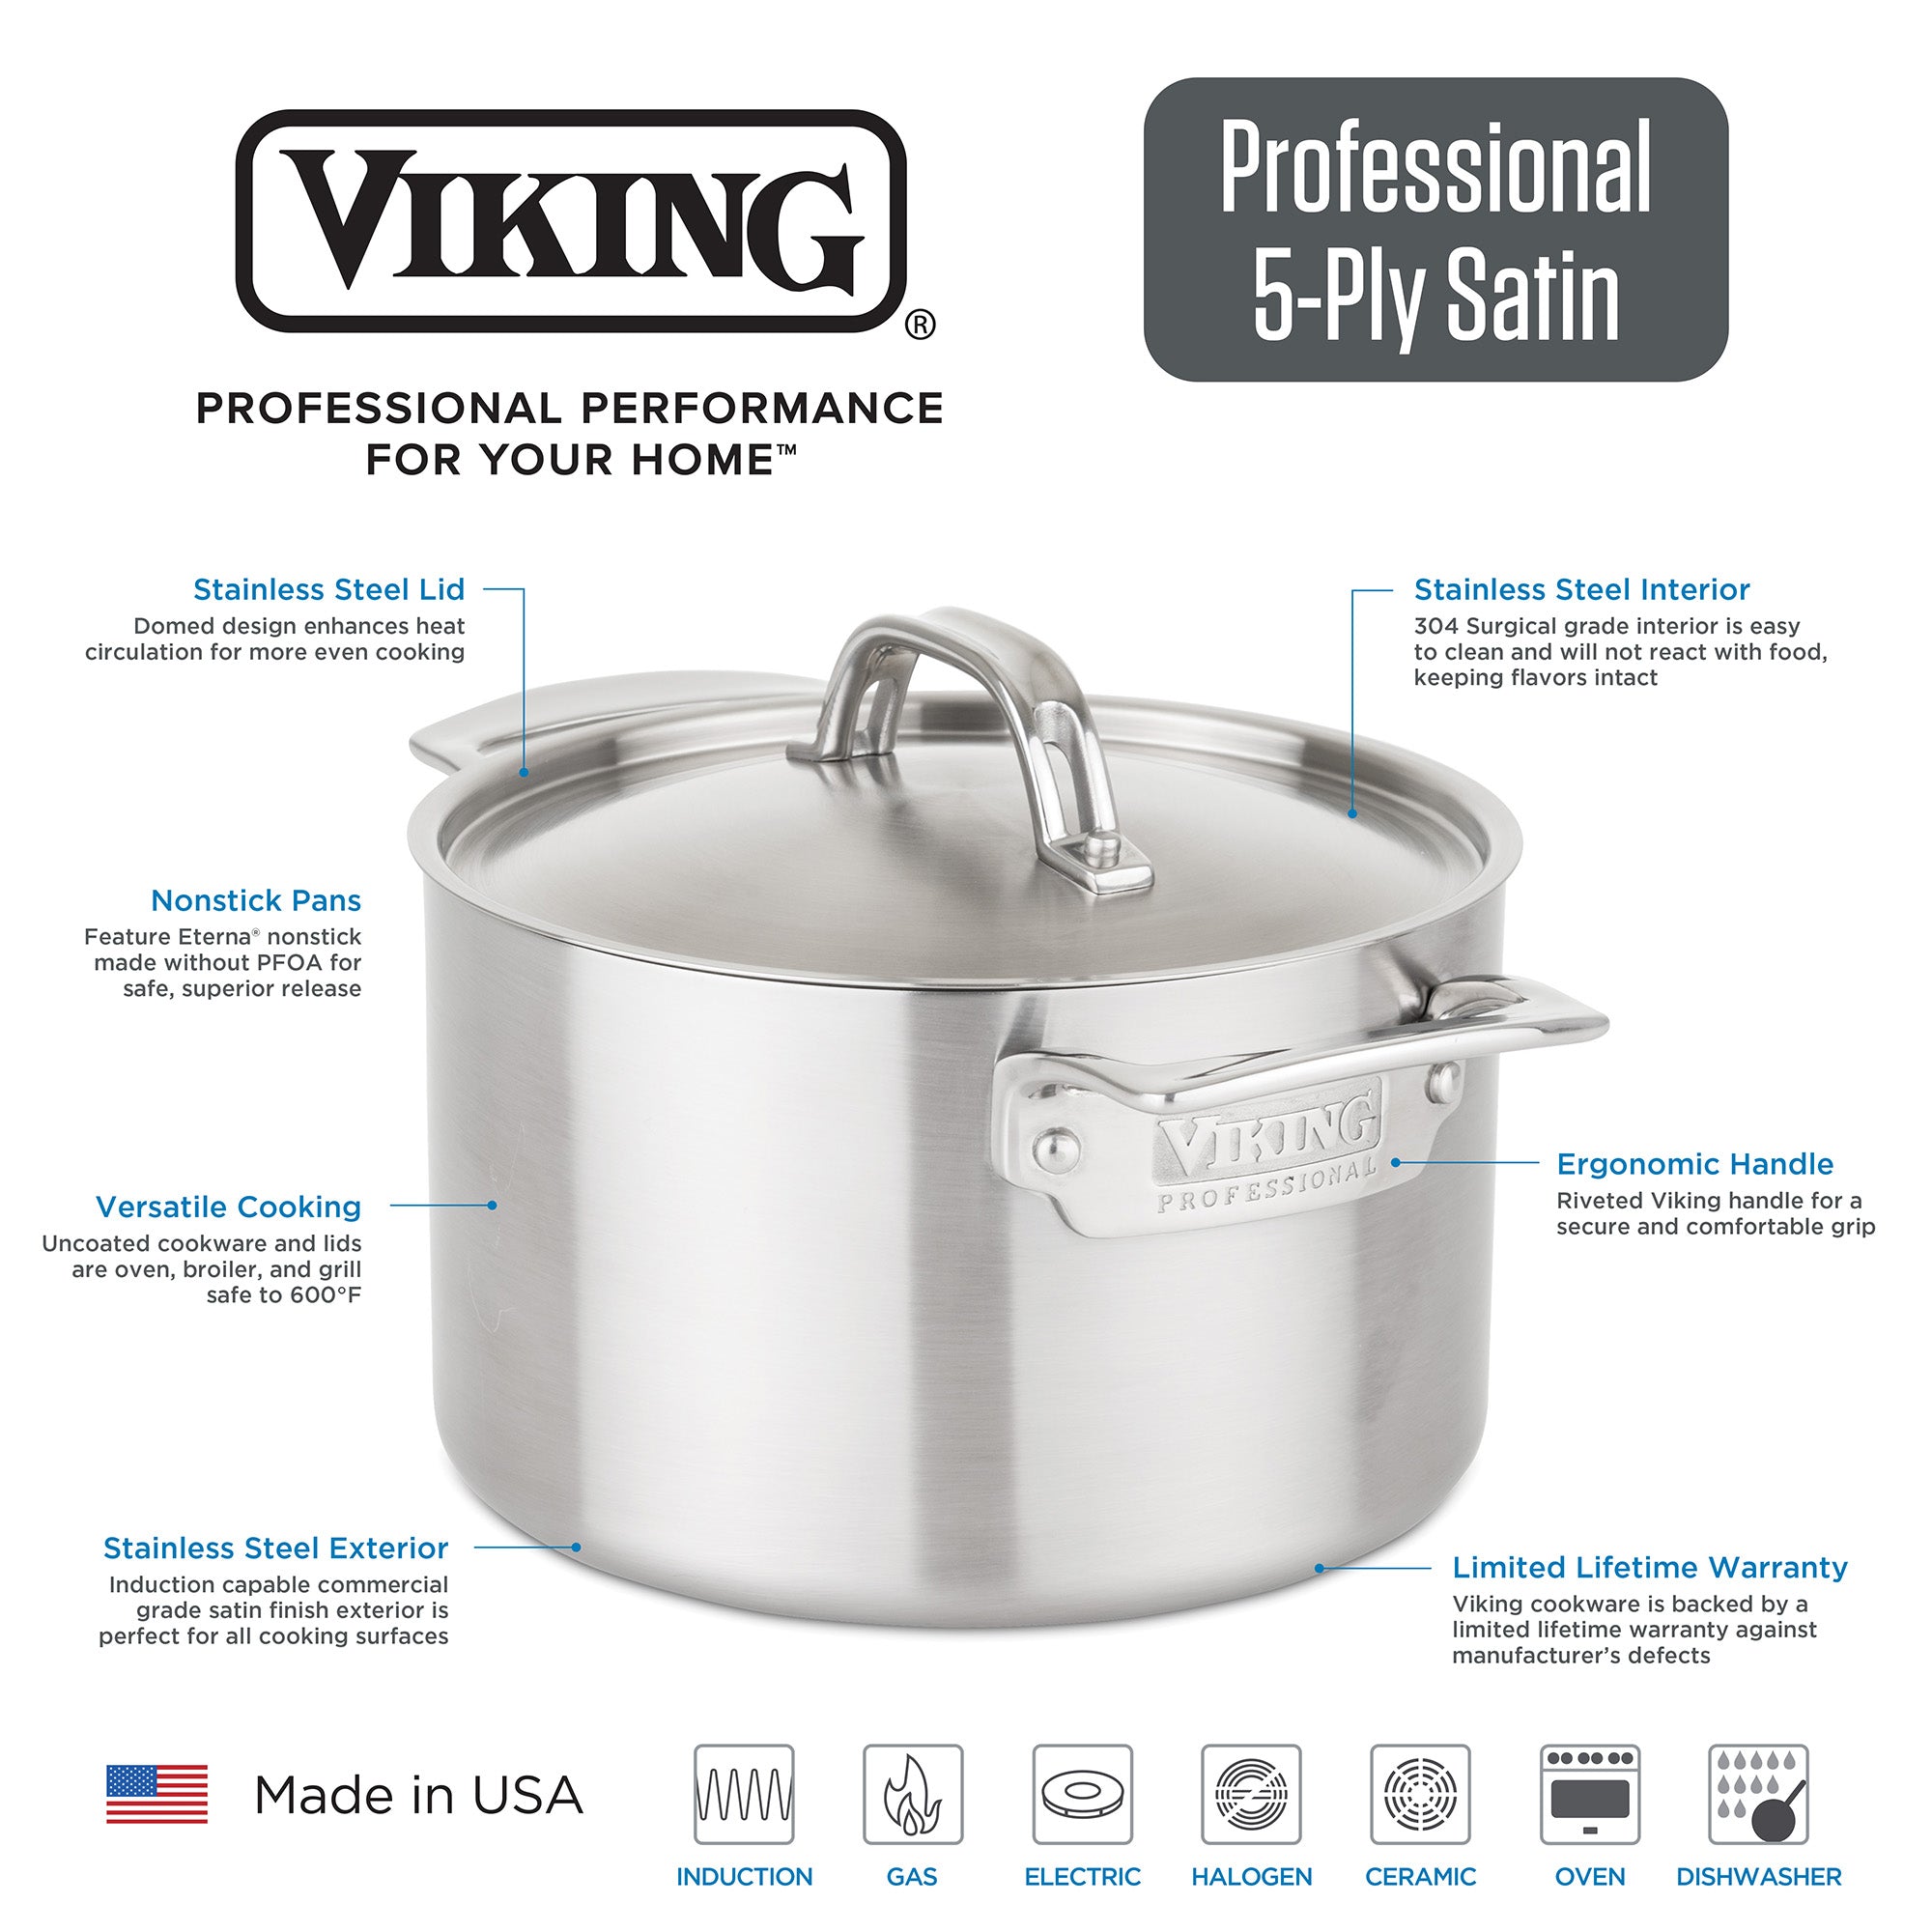 VIKING Culinary Professional 5-Ply Stainless Steel Nonstick Fry Pan, 10  Inch, Ergonomic Stay-Cool Handle, Dishwasher, Oven Safe, Works on All  Cooktops